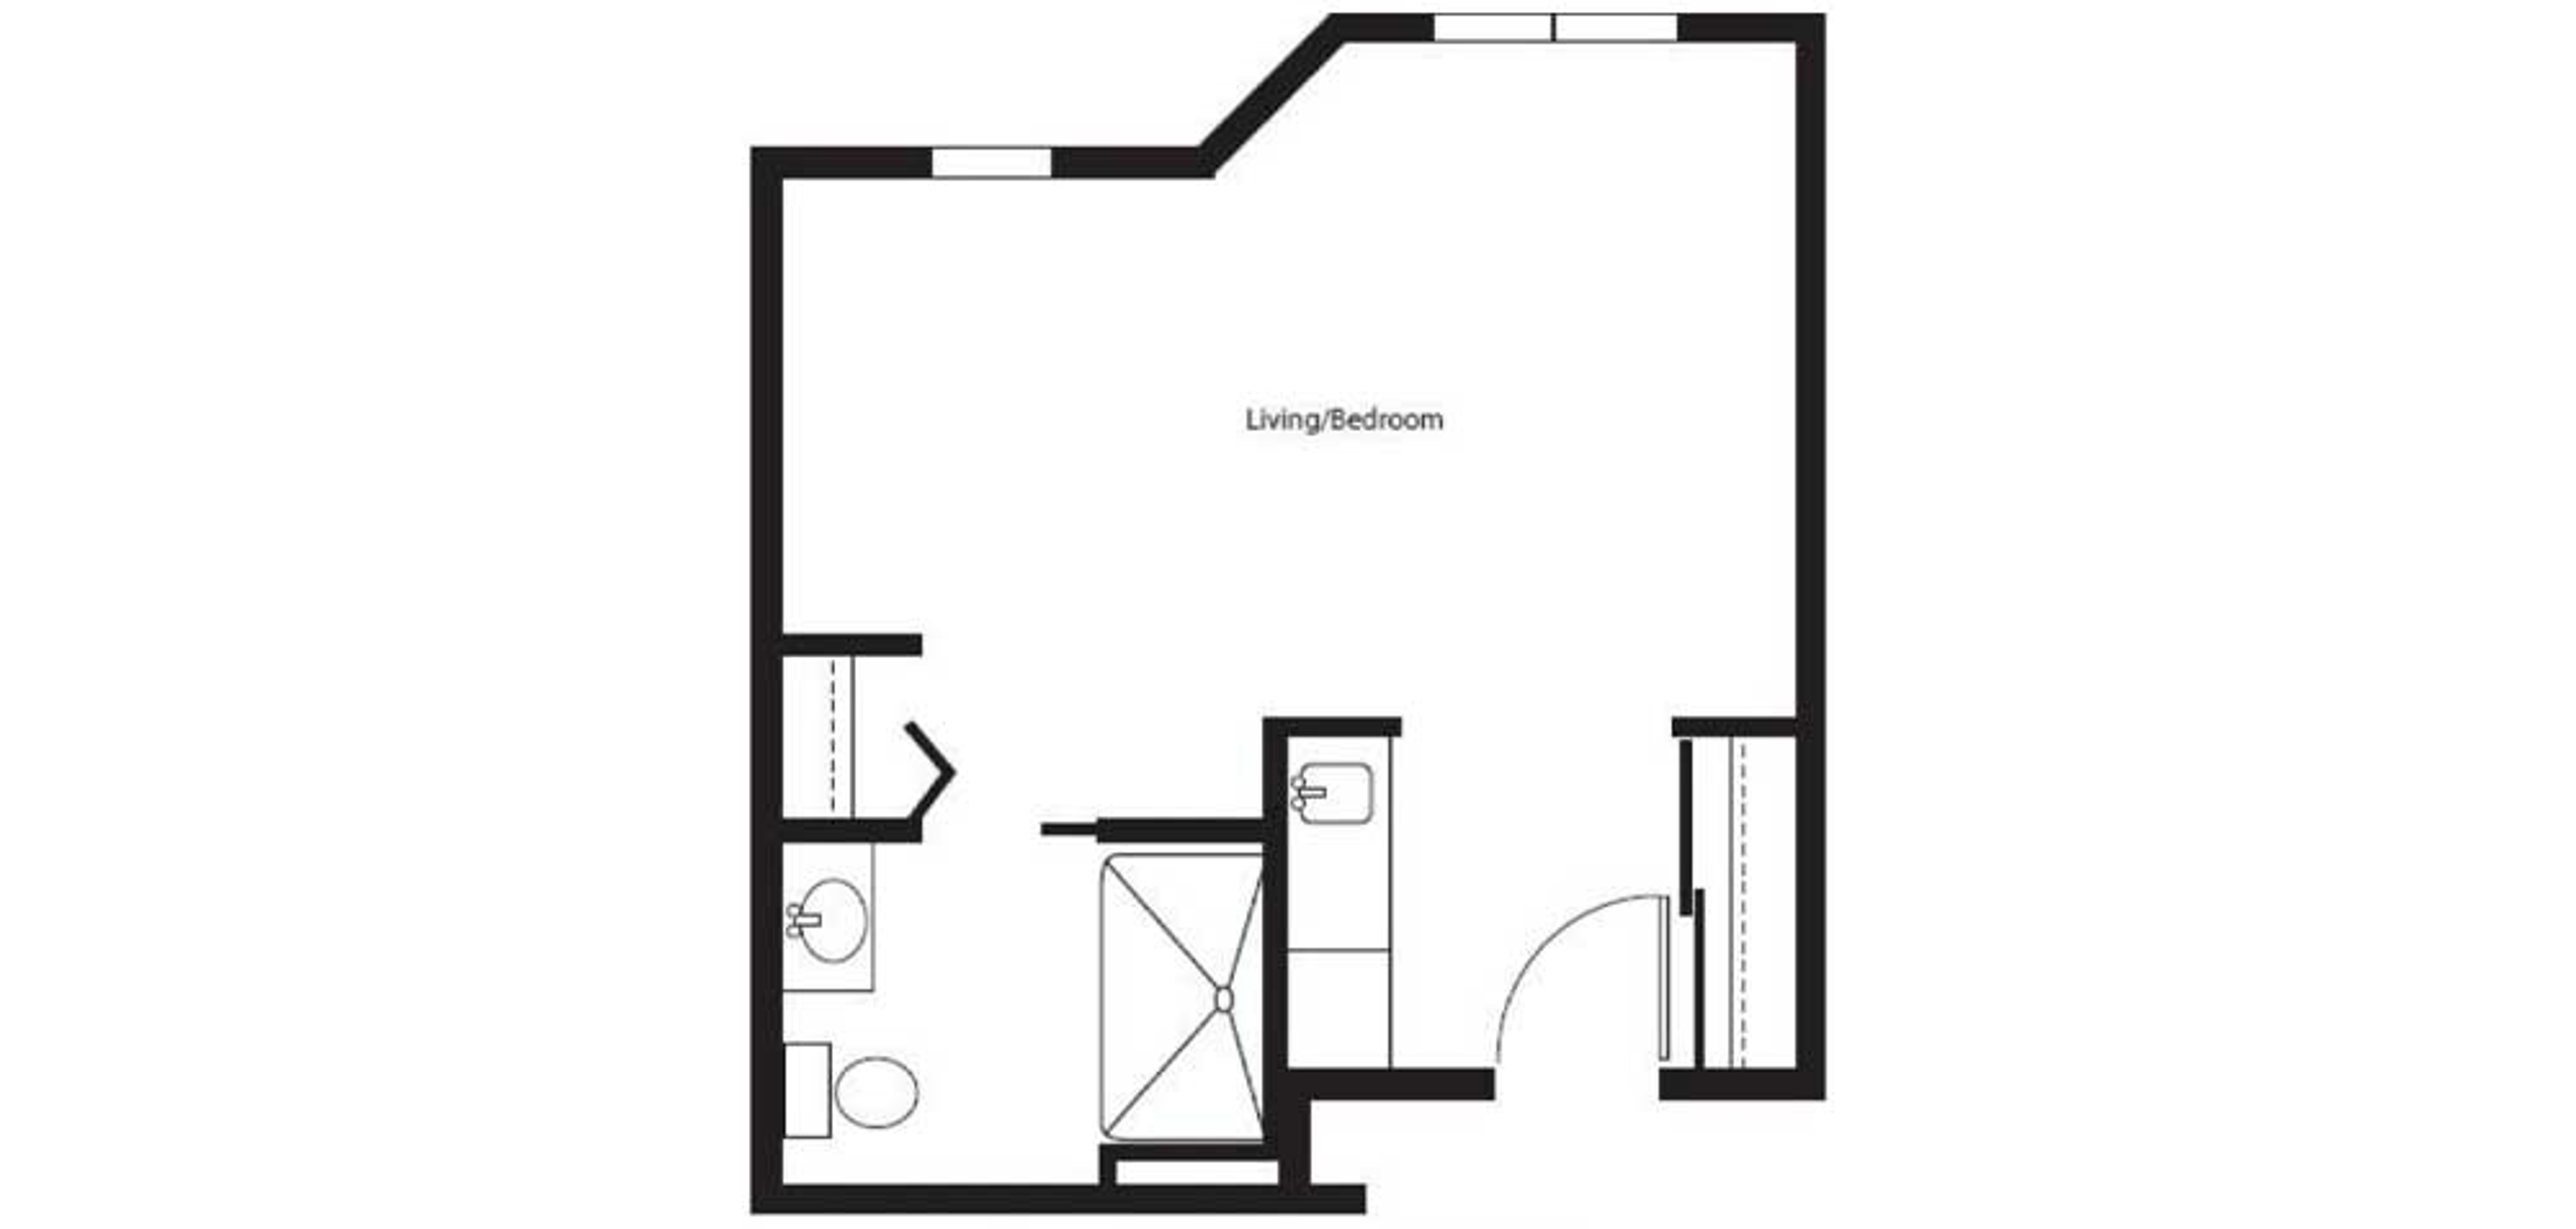 Floorplan - Pelican Pointe - Room, 359 or 365 sq. ft. v1 Assisted Living